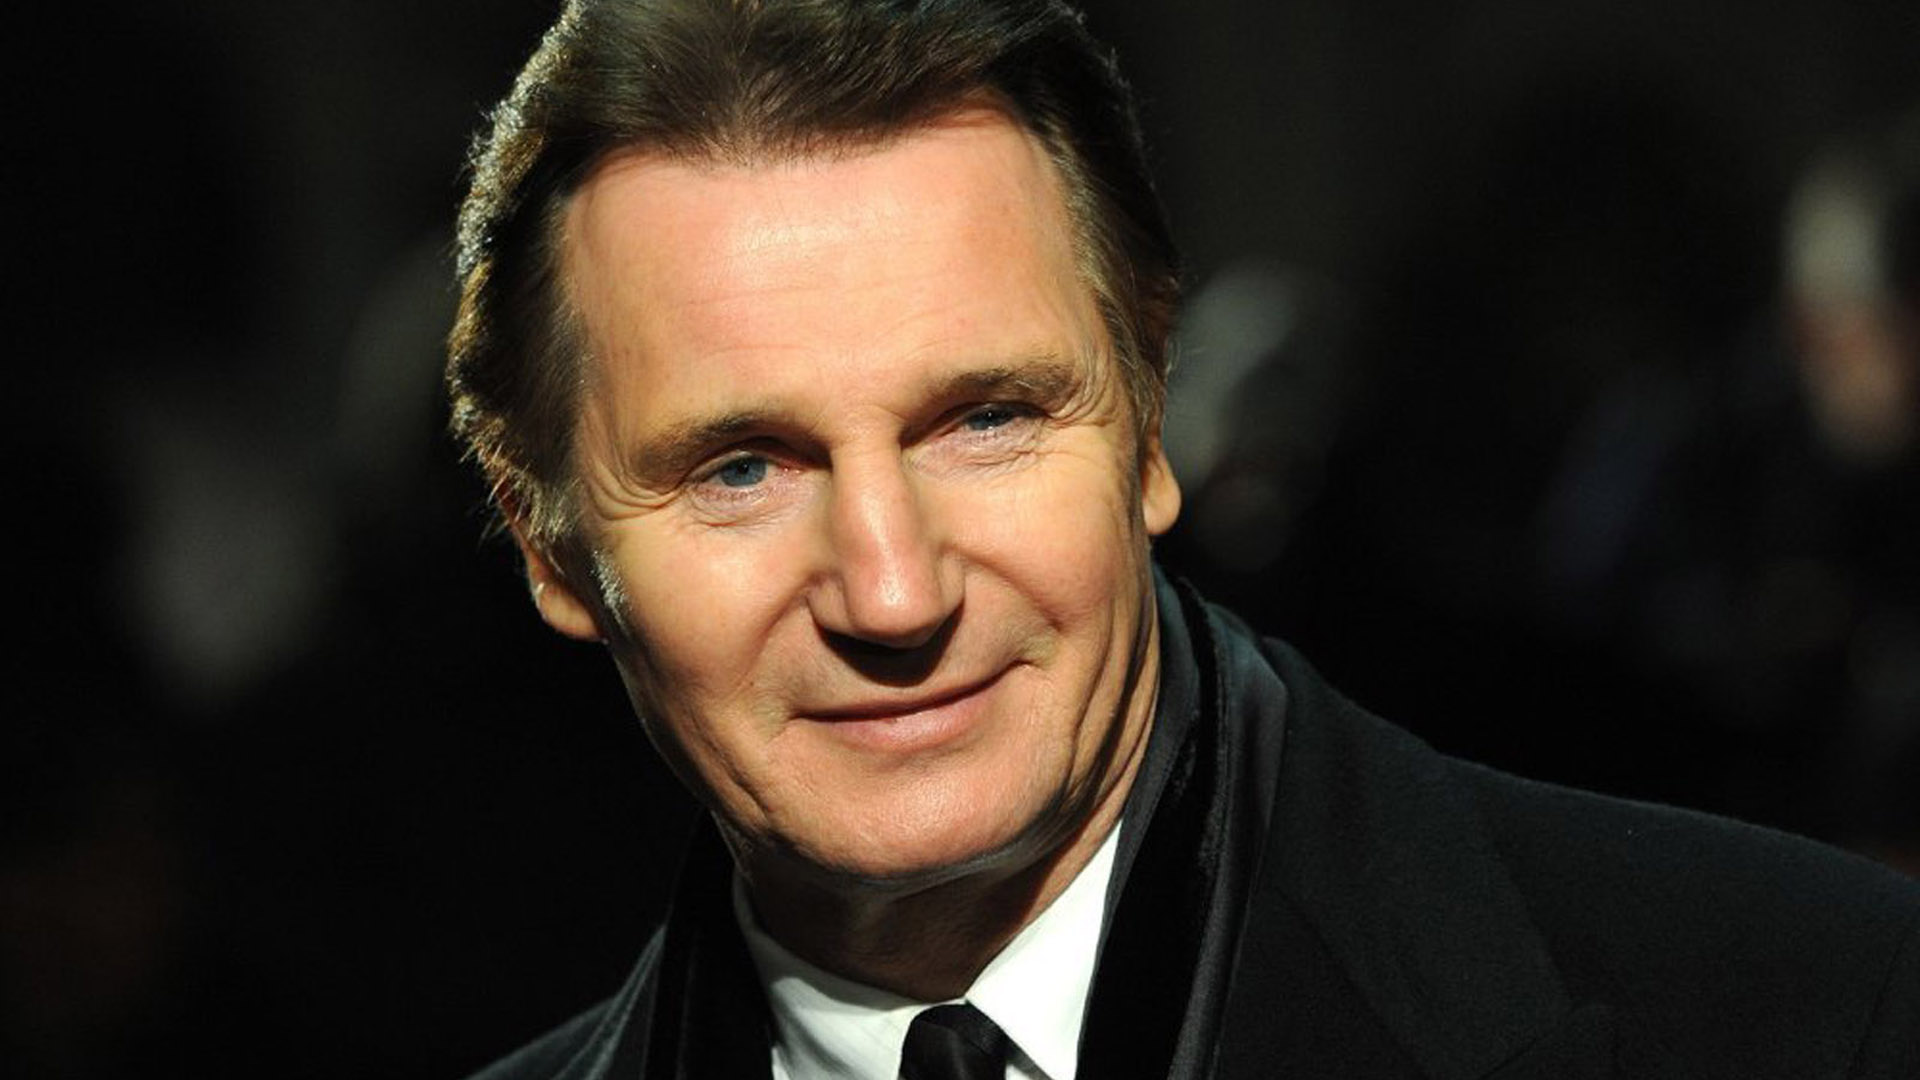 Facts About Liam Neeson